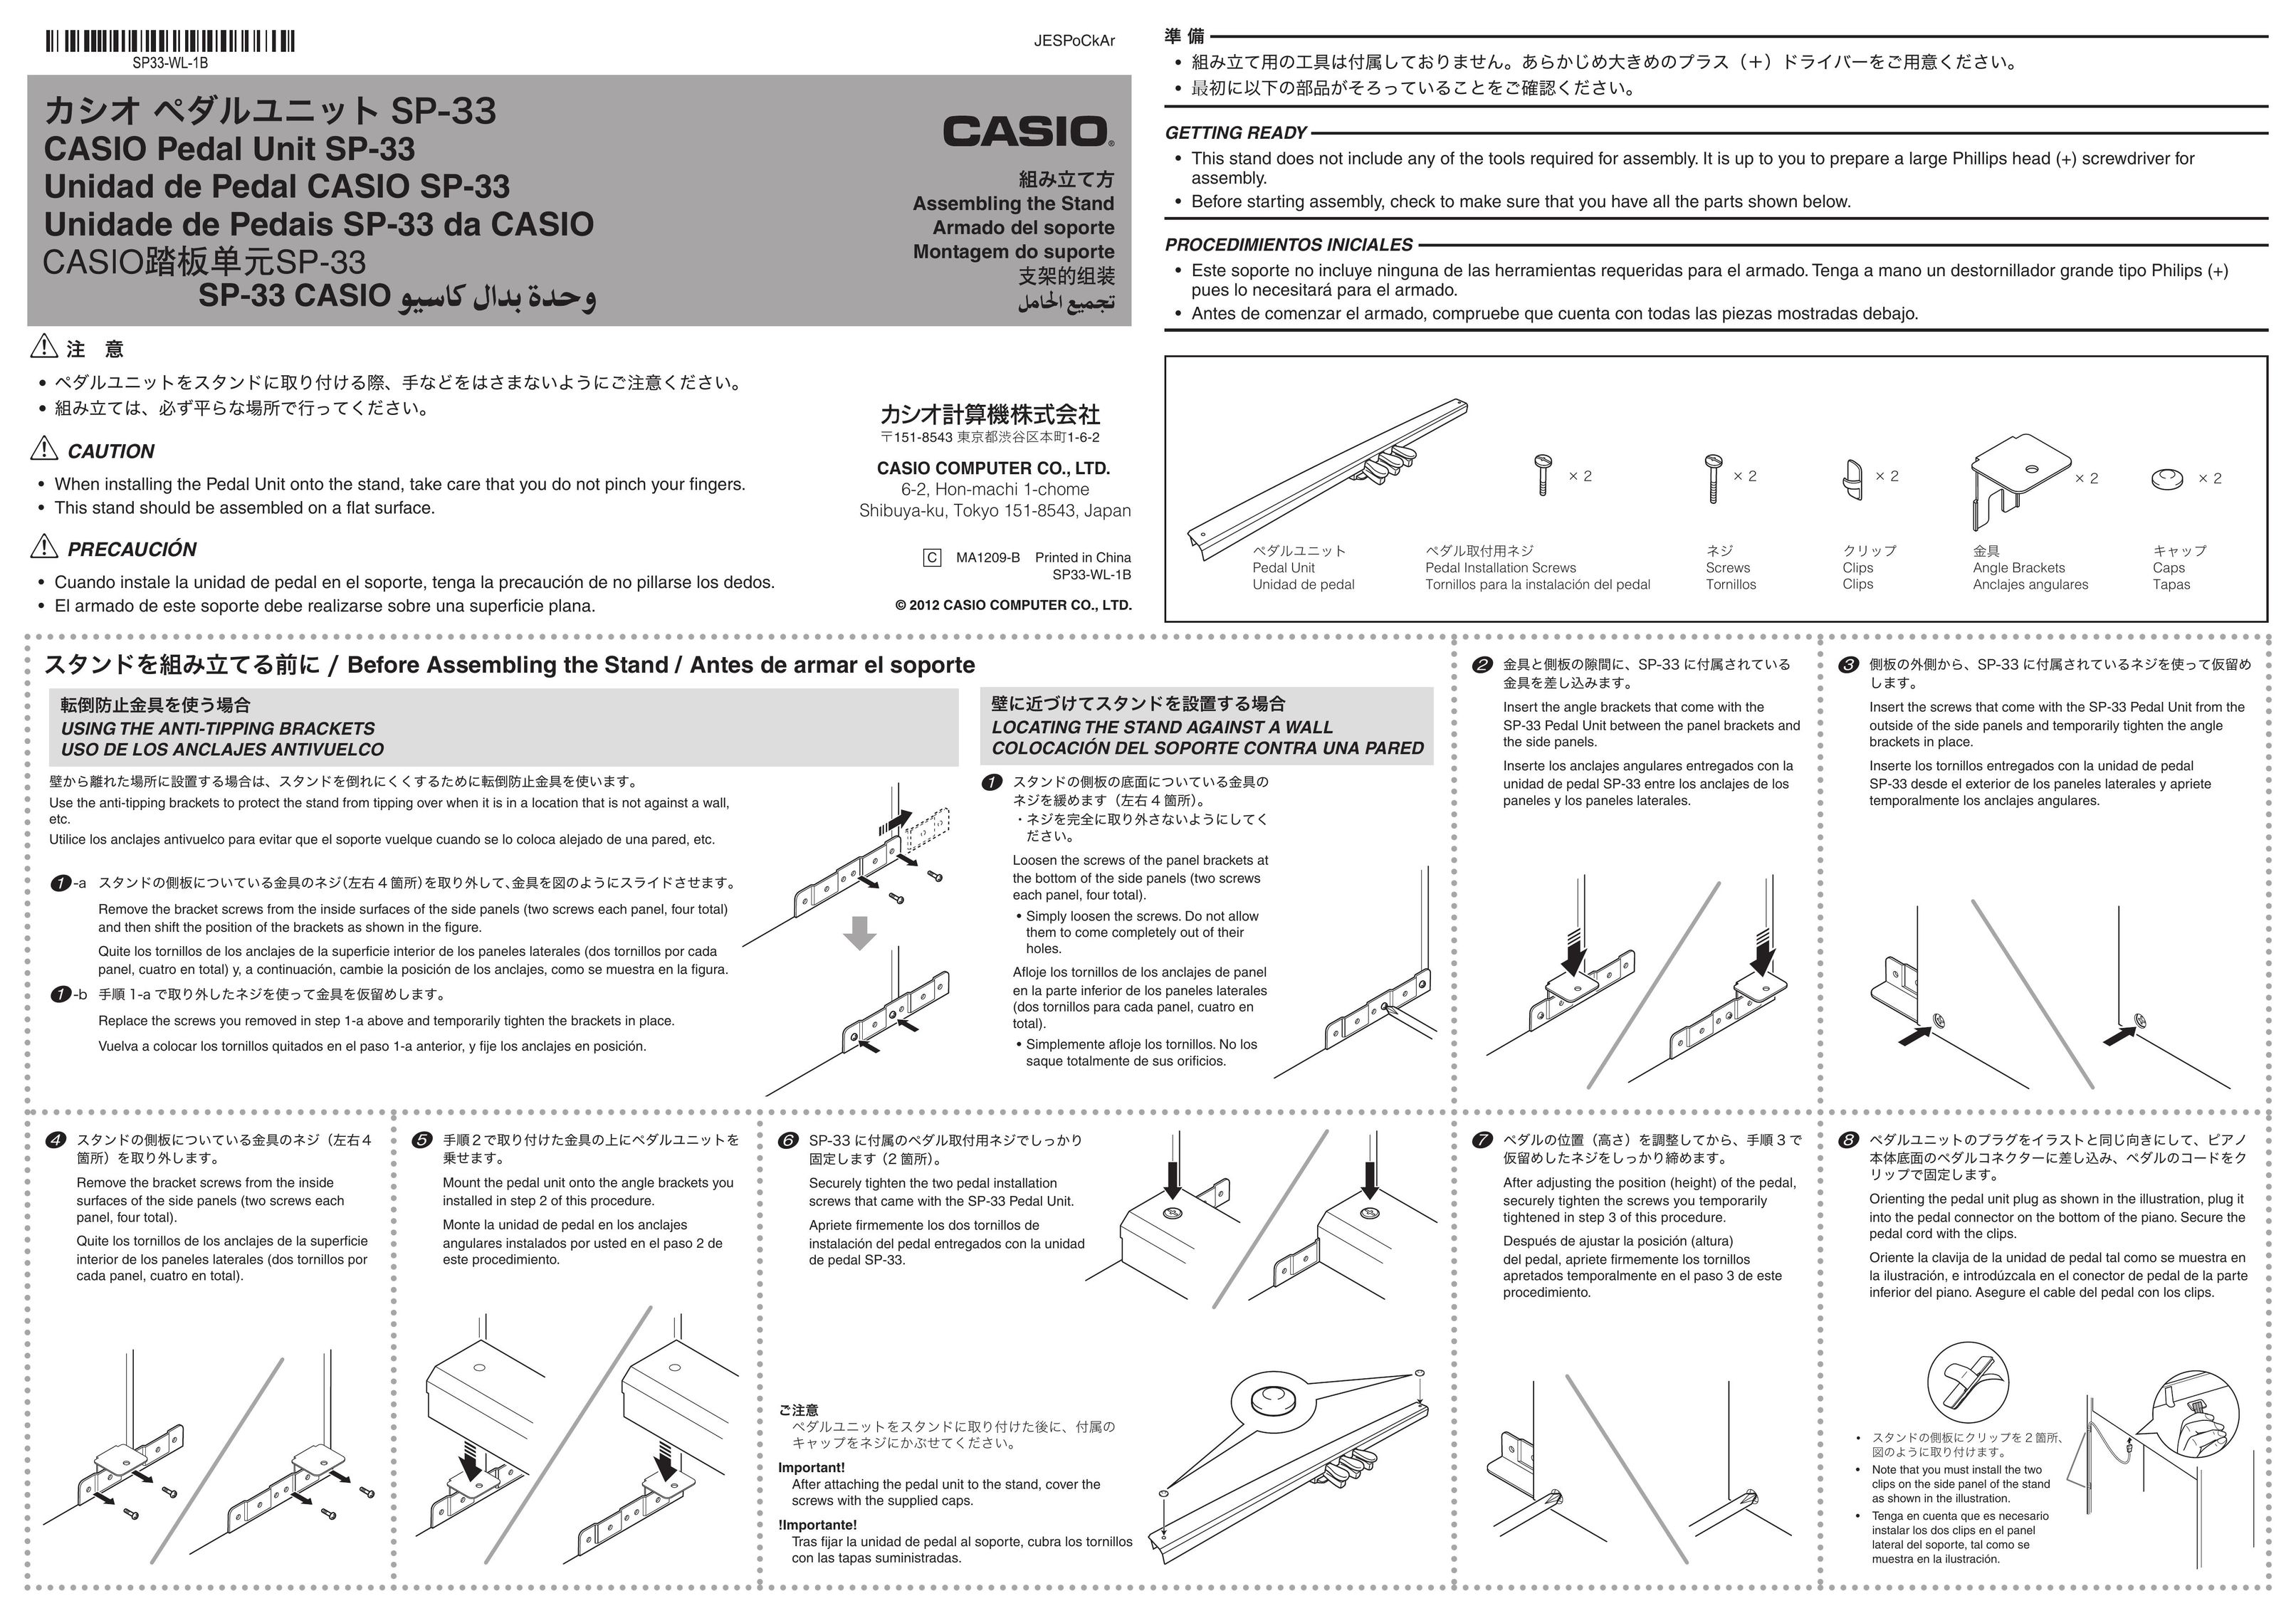 Casio SP-33 Musical Toy Instrument User Manual